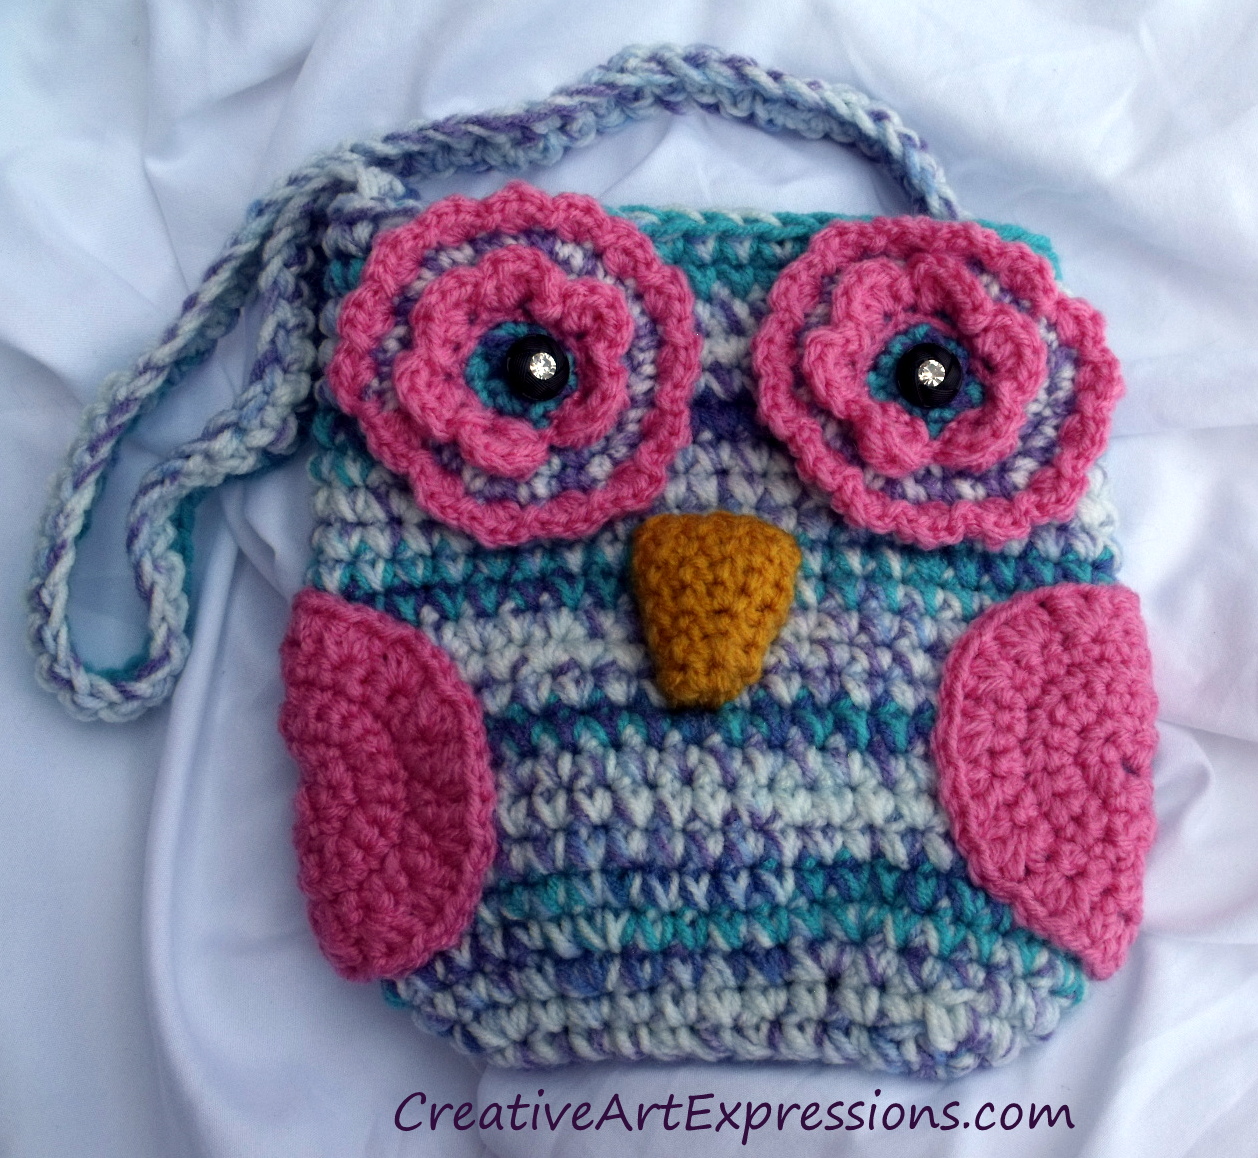 Creative Art Expressions Hand Crocheted Blue & Pink Owl Purse